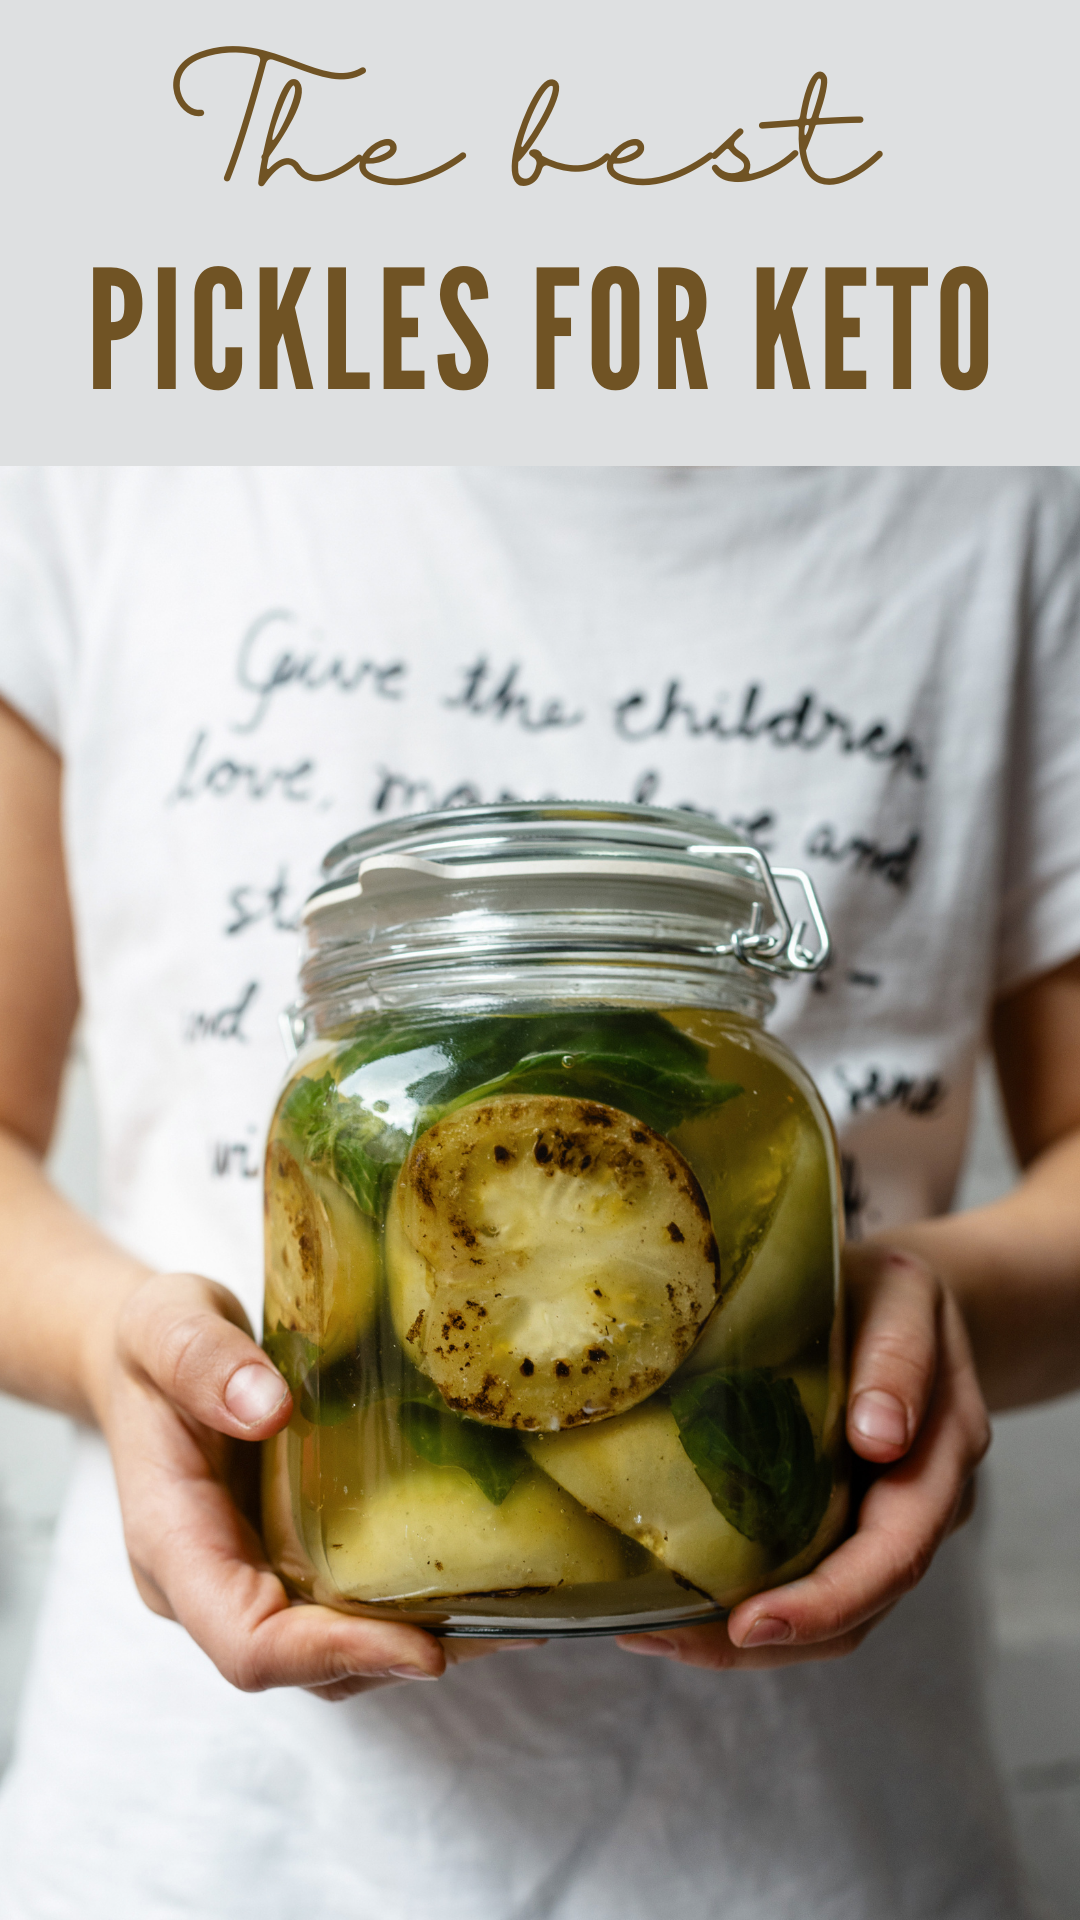 Can You Eat Pickles on a Keto Diet? The Best Pickles for Keto